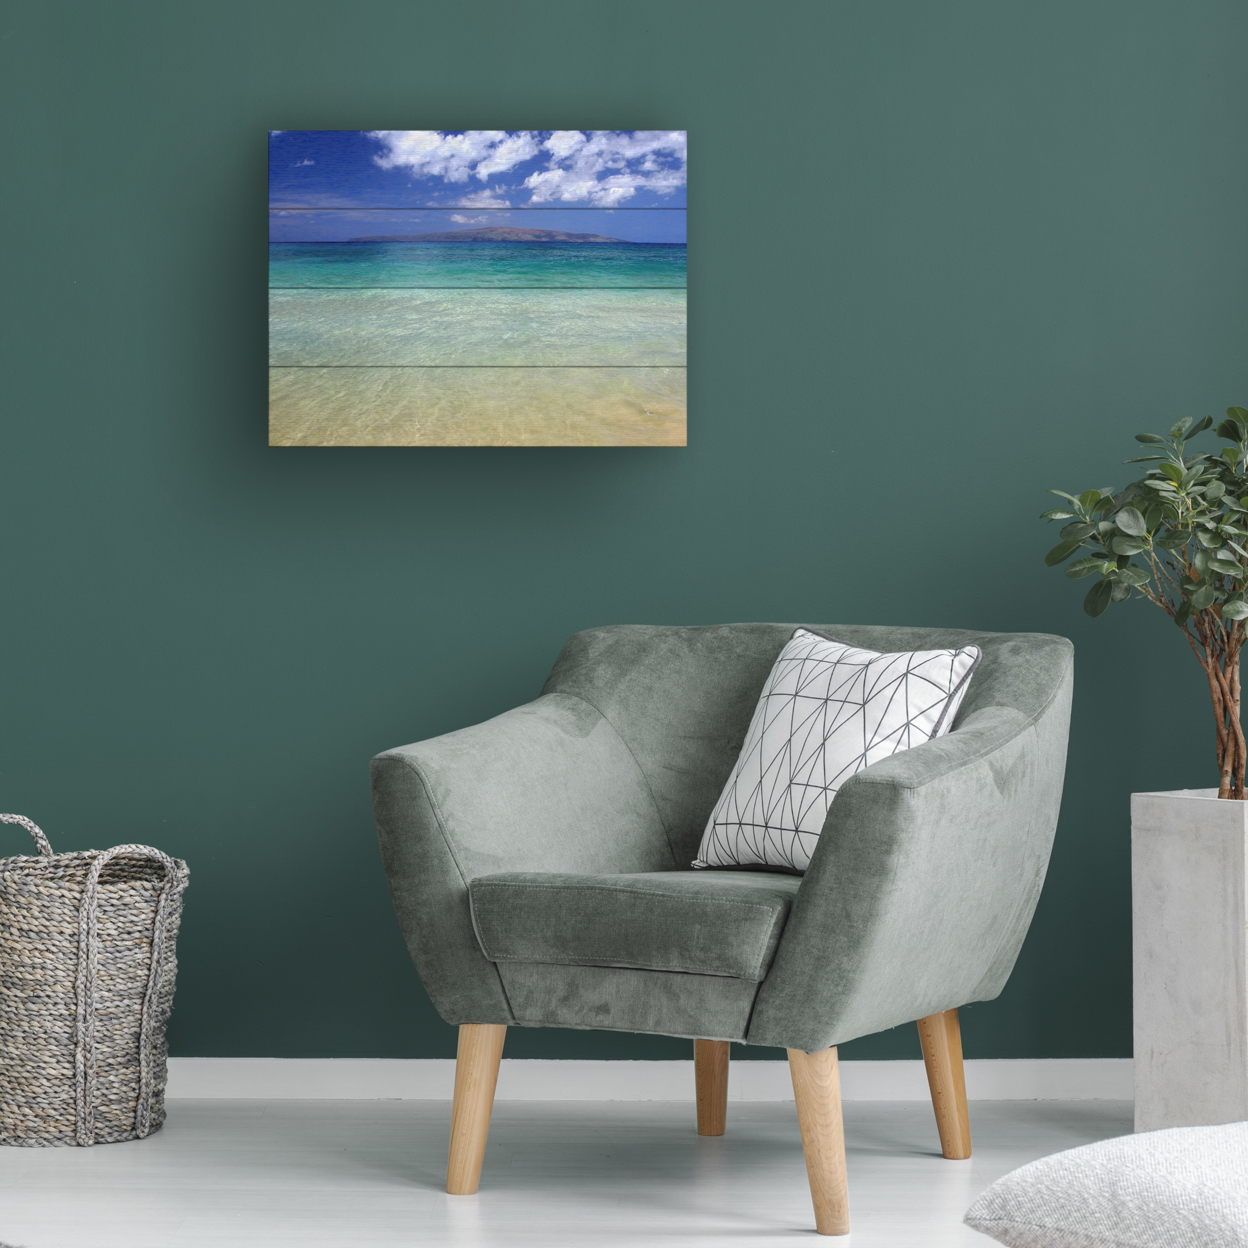 Wall Art 12 X 16 Inches Titled Hawaii Blue Beach Ready To Hang Printed On Wooden Planks